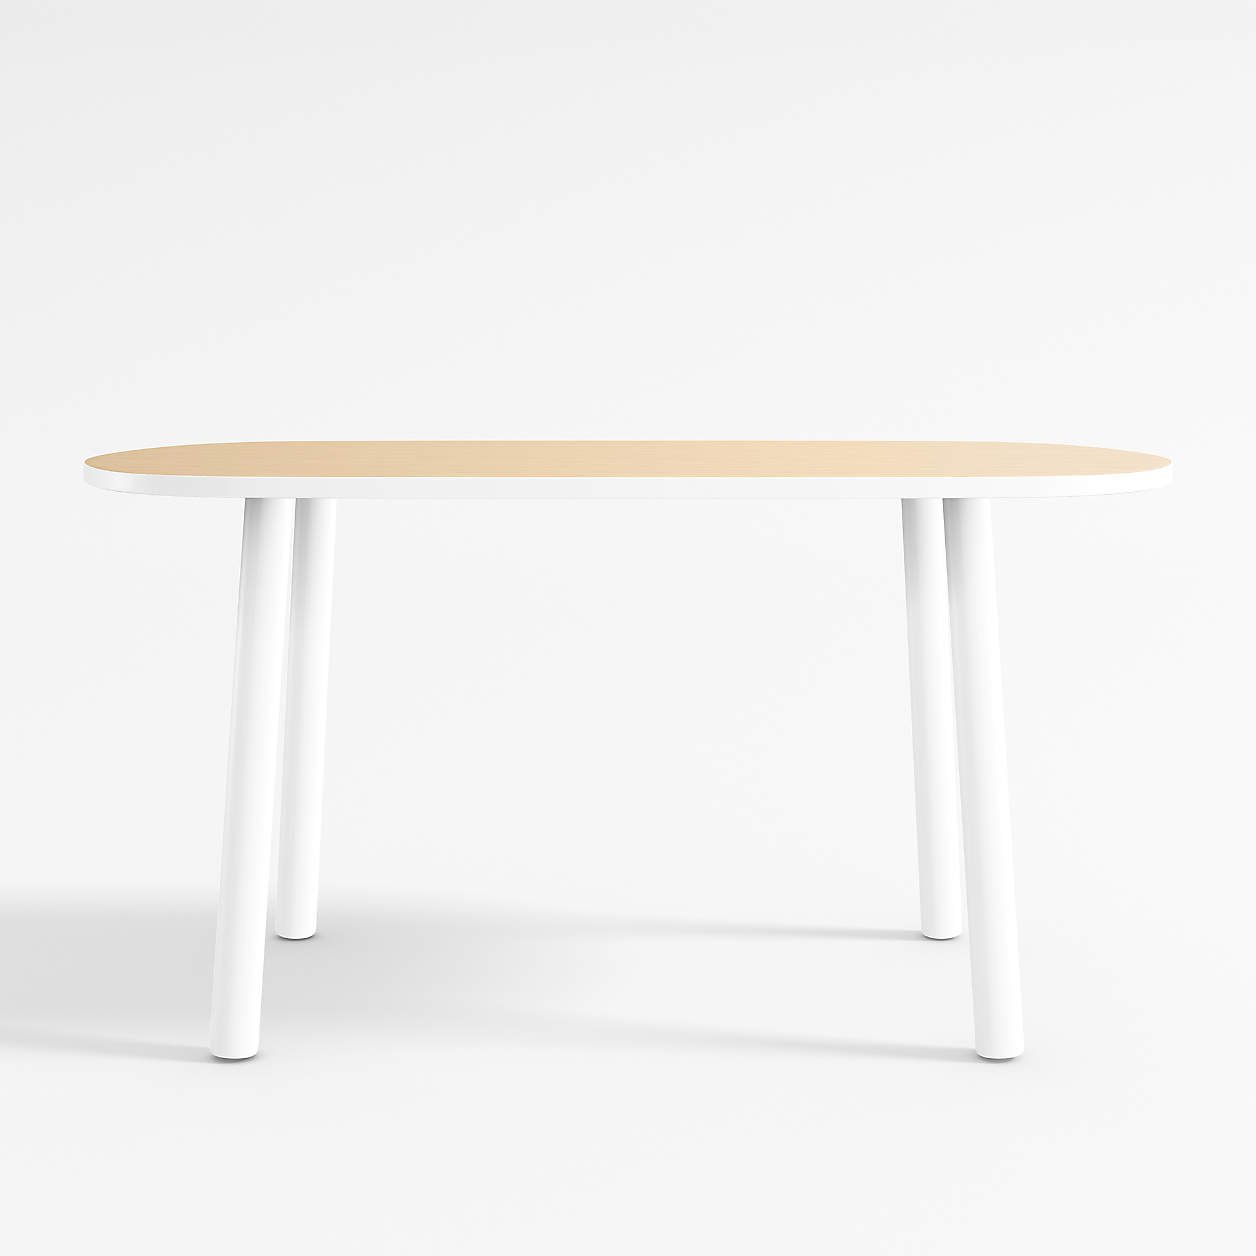 rue-white-wood-kids-table-with-23-legs.jpg